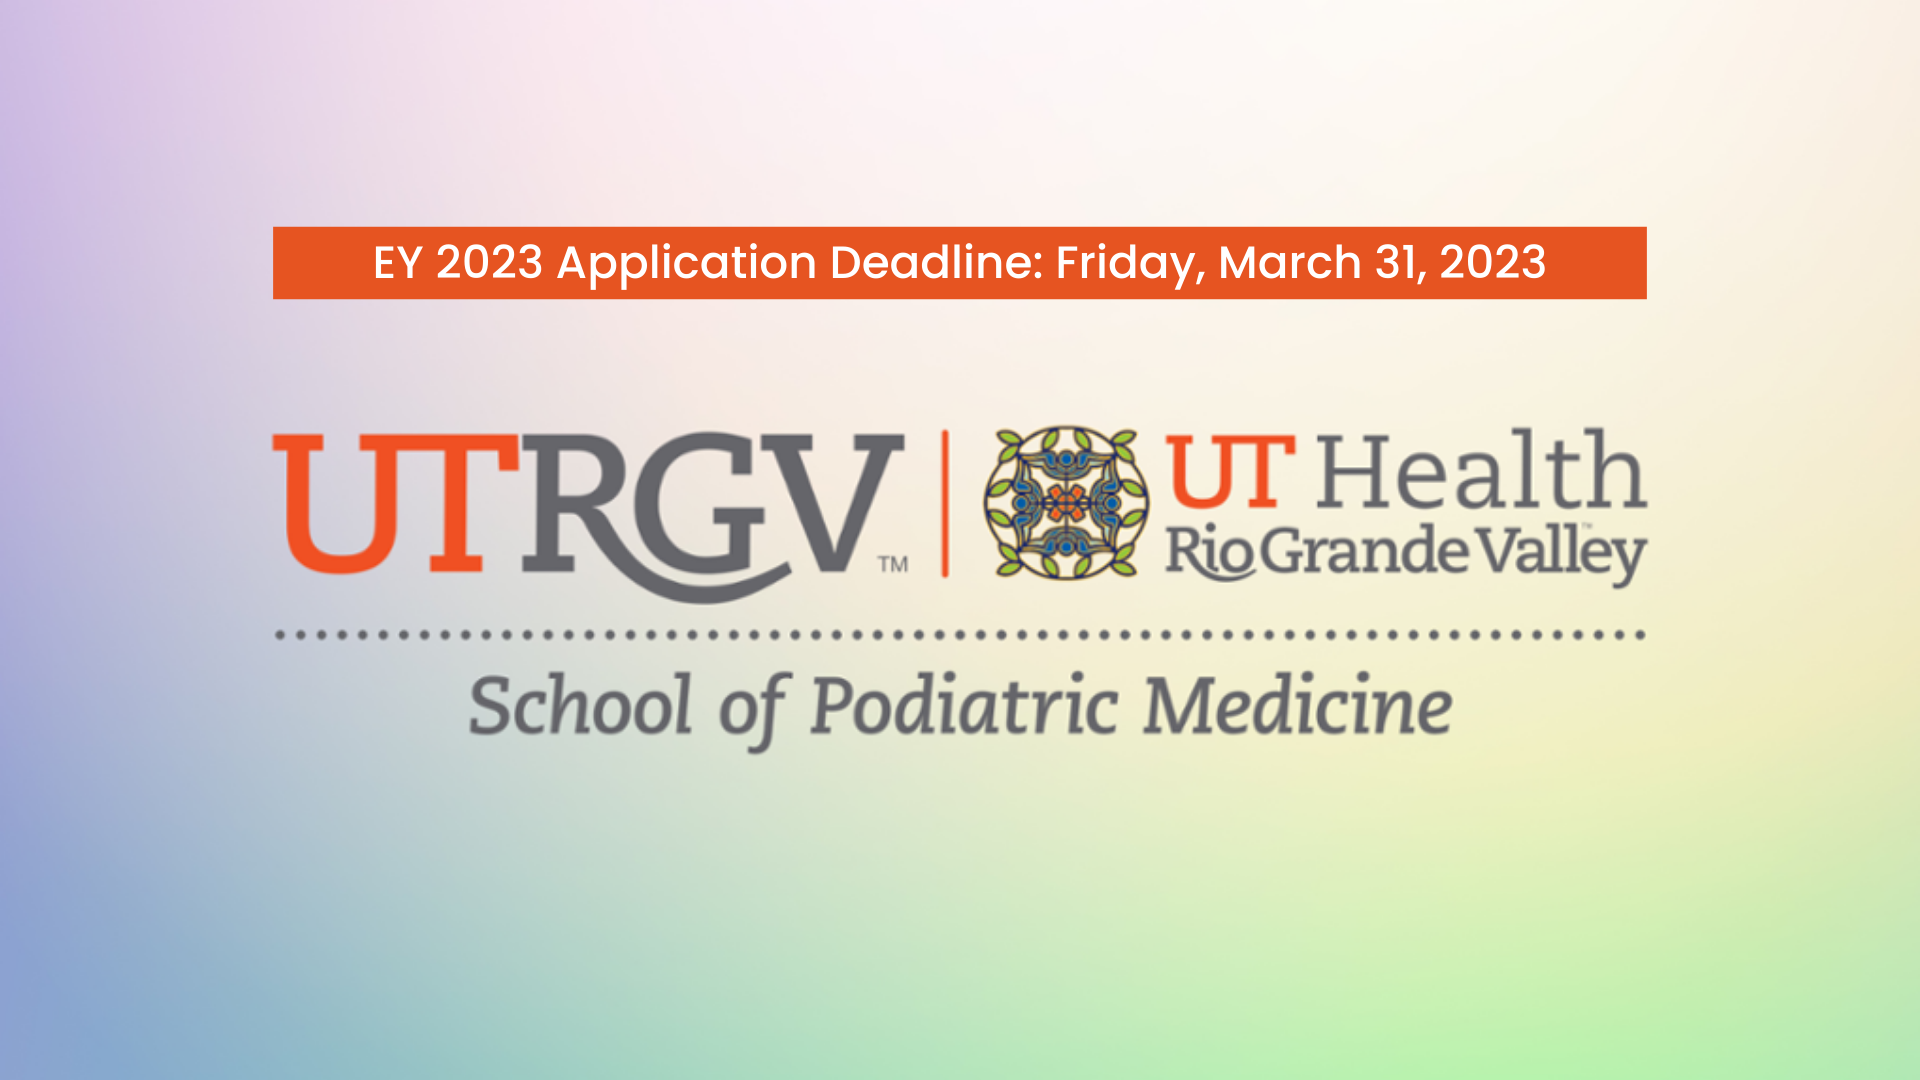 There is Still Time to Apply to The UTRGV School of Podiatric Medicine!